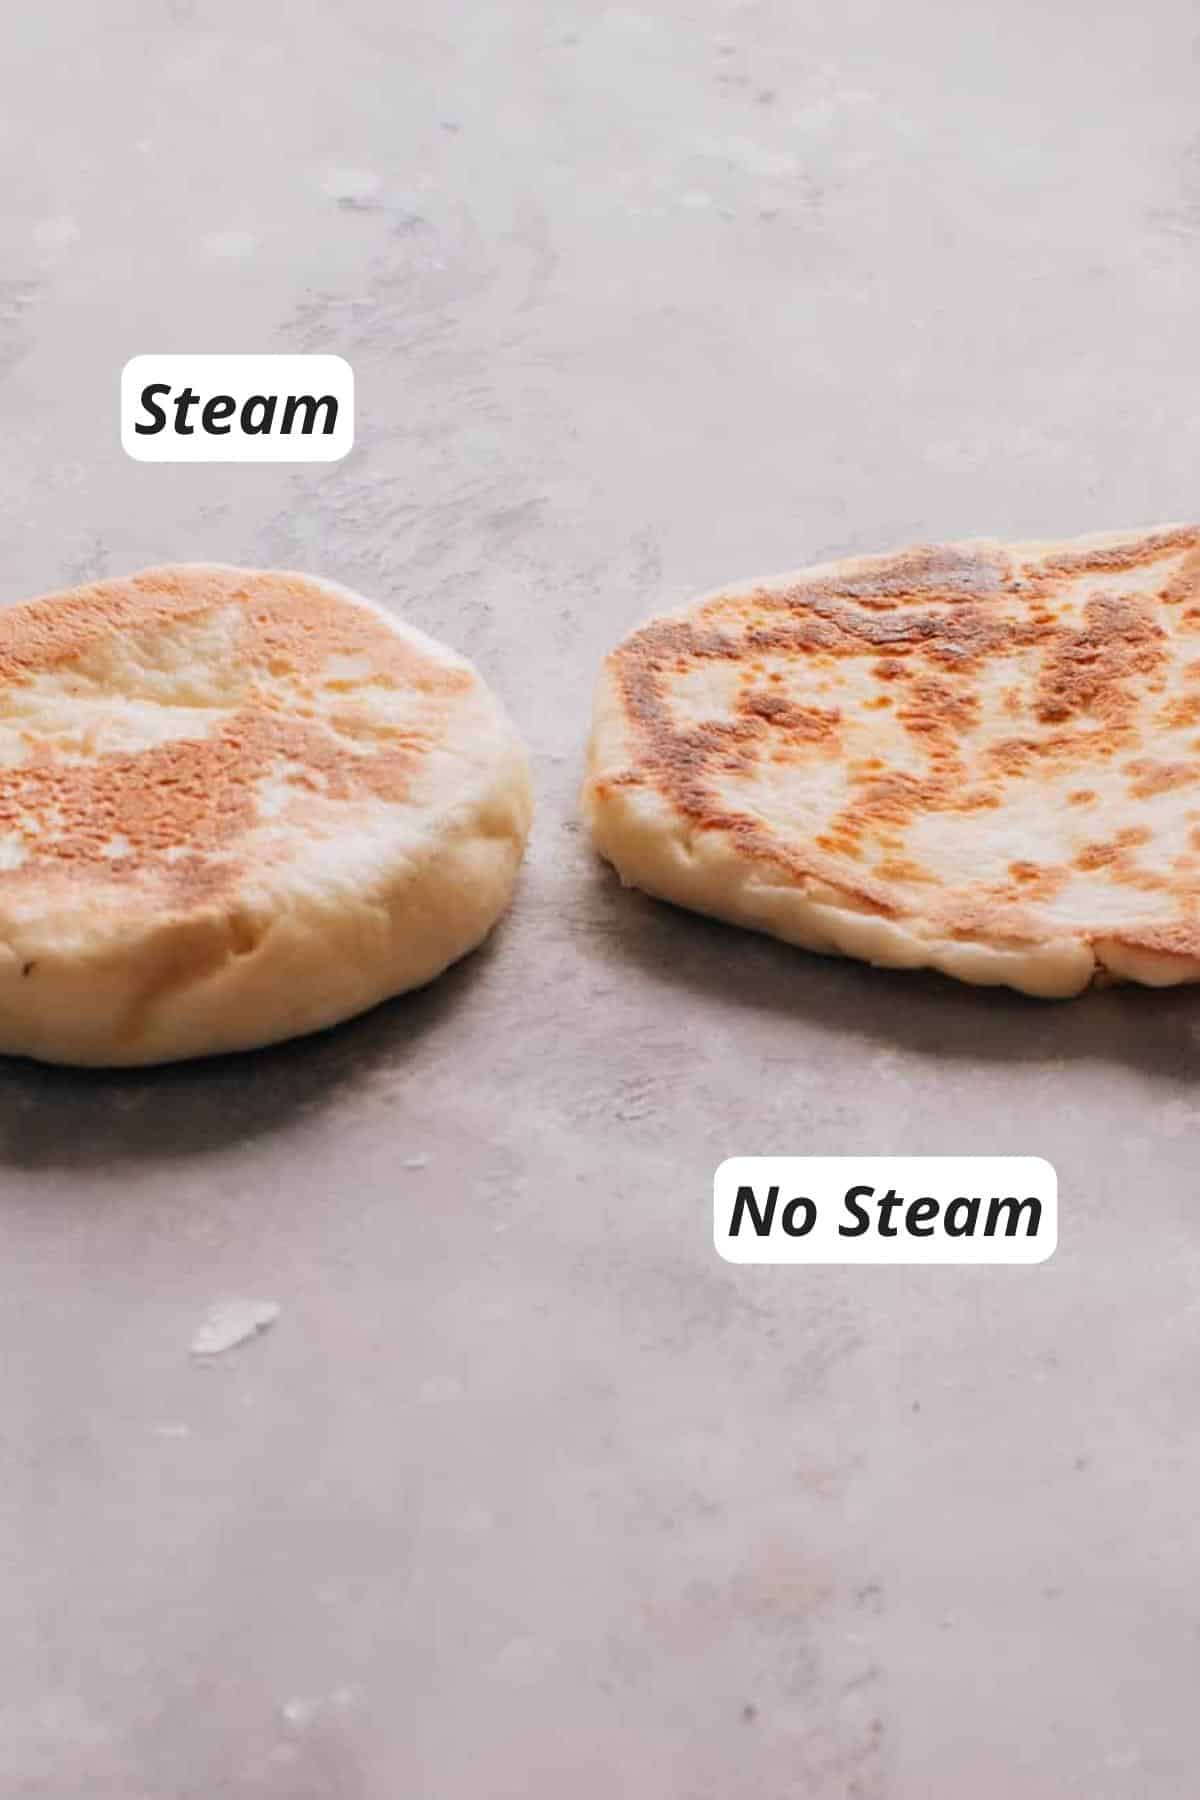 Two pieces of Turkish bread are shown, one baked in an oven with steam resulting in a fluffy texture, and the other baked without steam, giving it a thinner appearance.